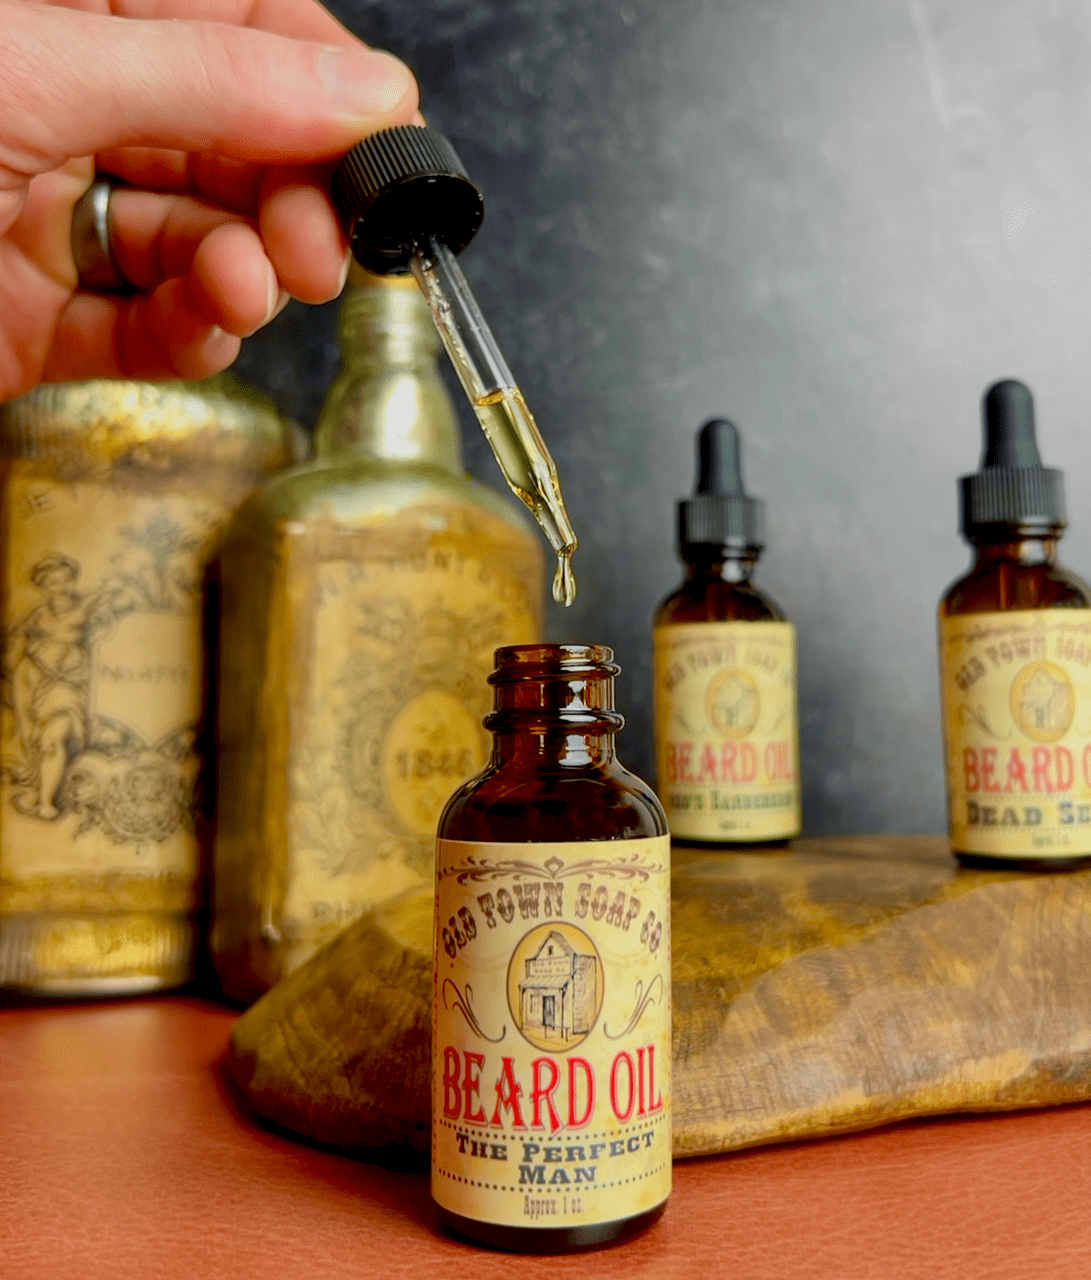 The Sea Pirate - Beard Oil - Old Town Soap Co.